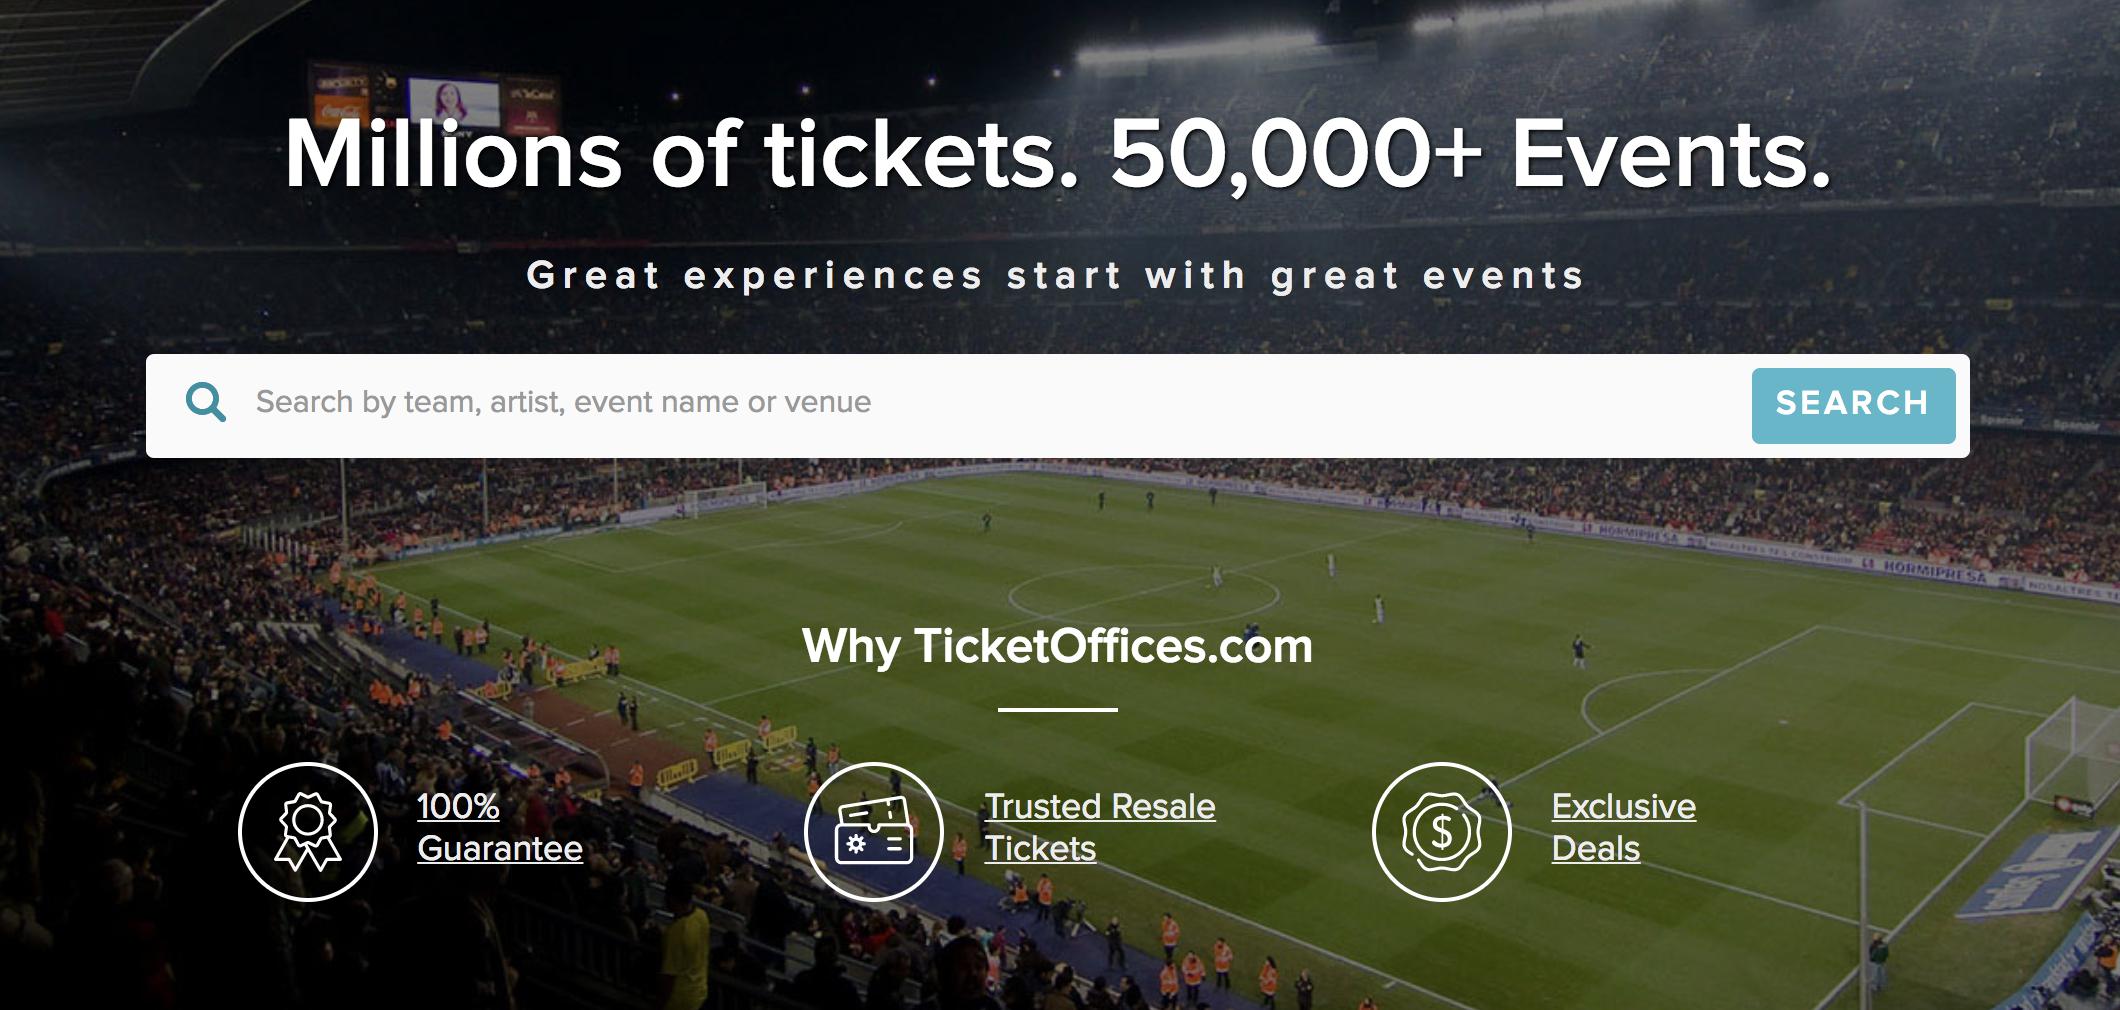 How TicketOffices.com Reinvented Ticket Buying - Press Release